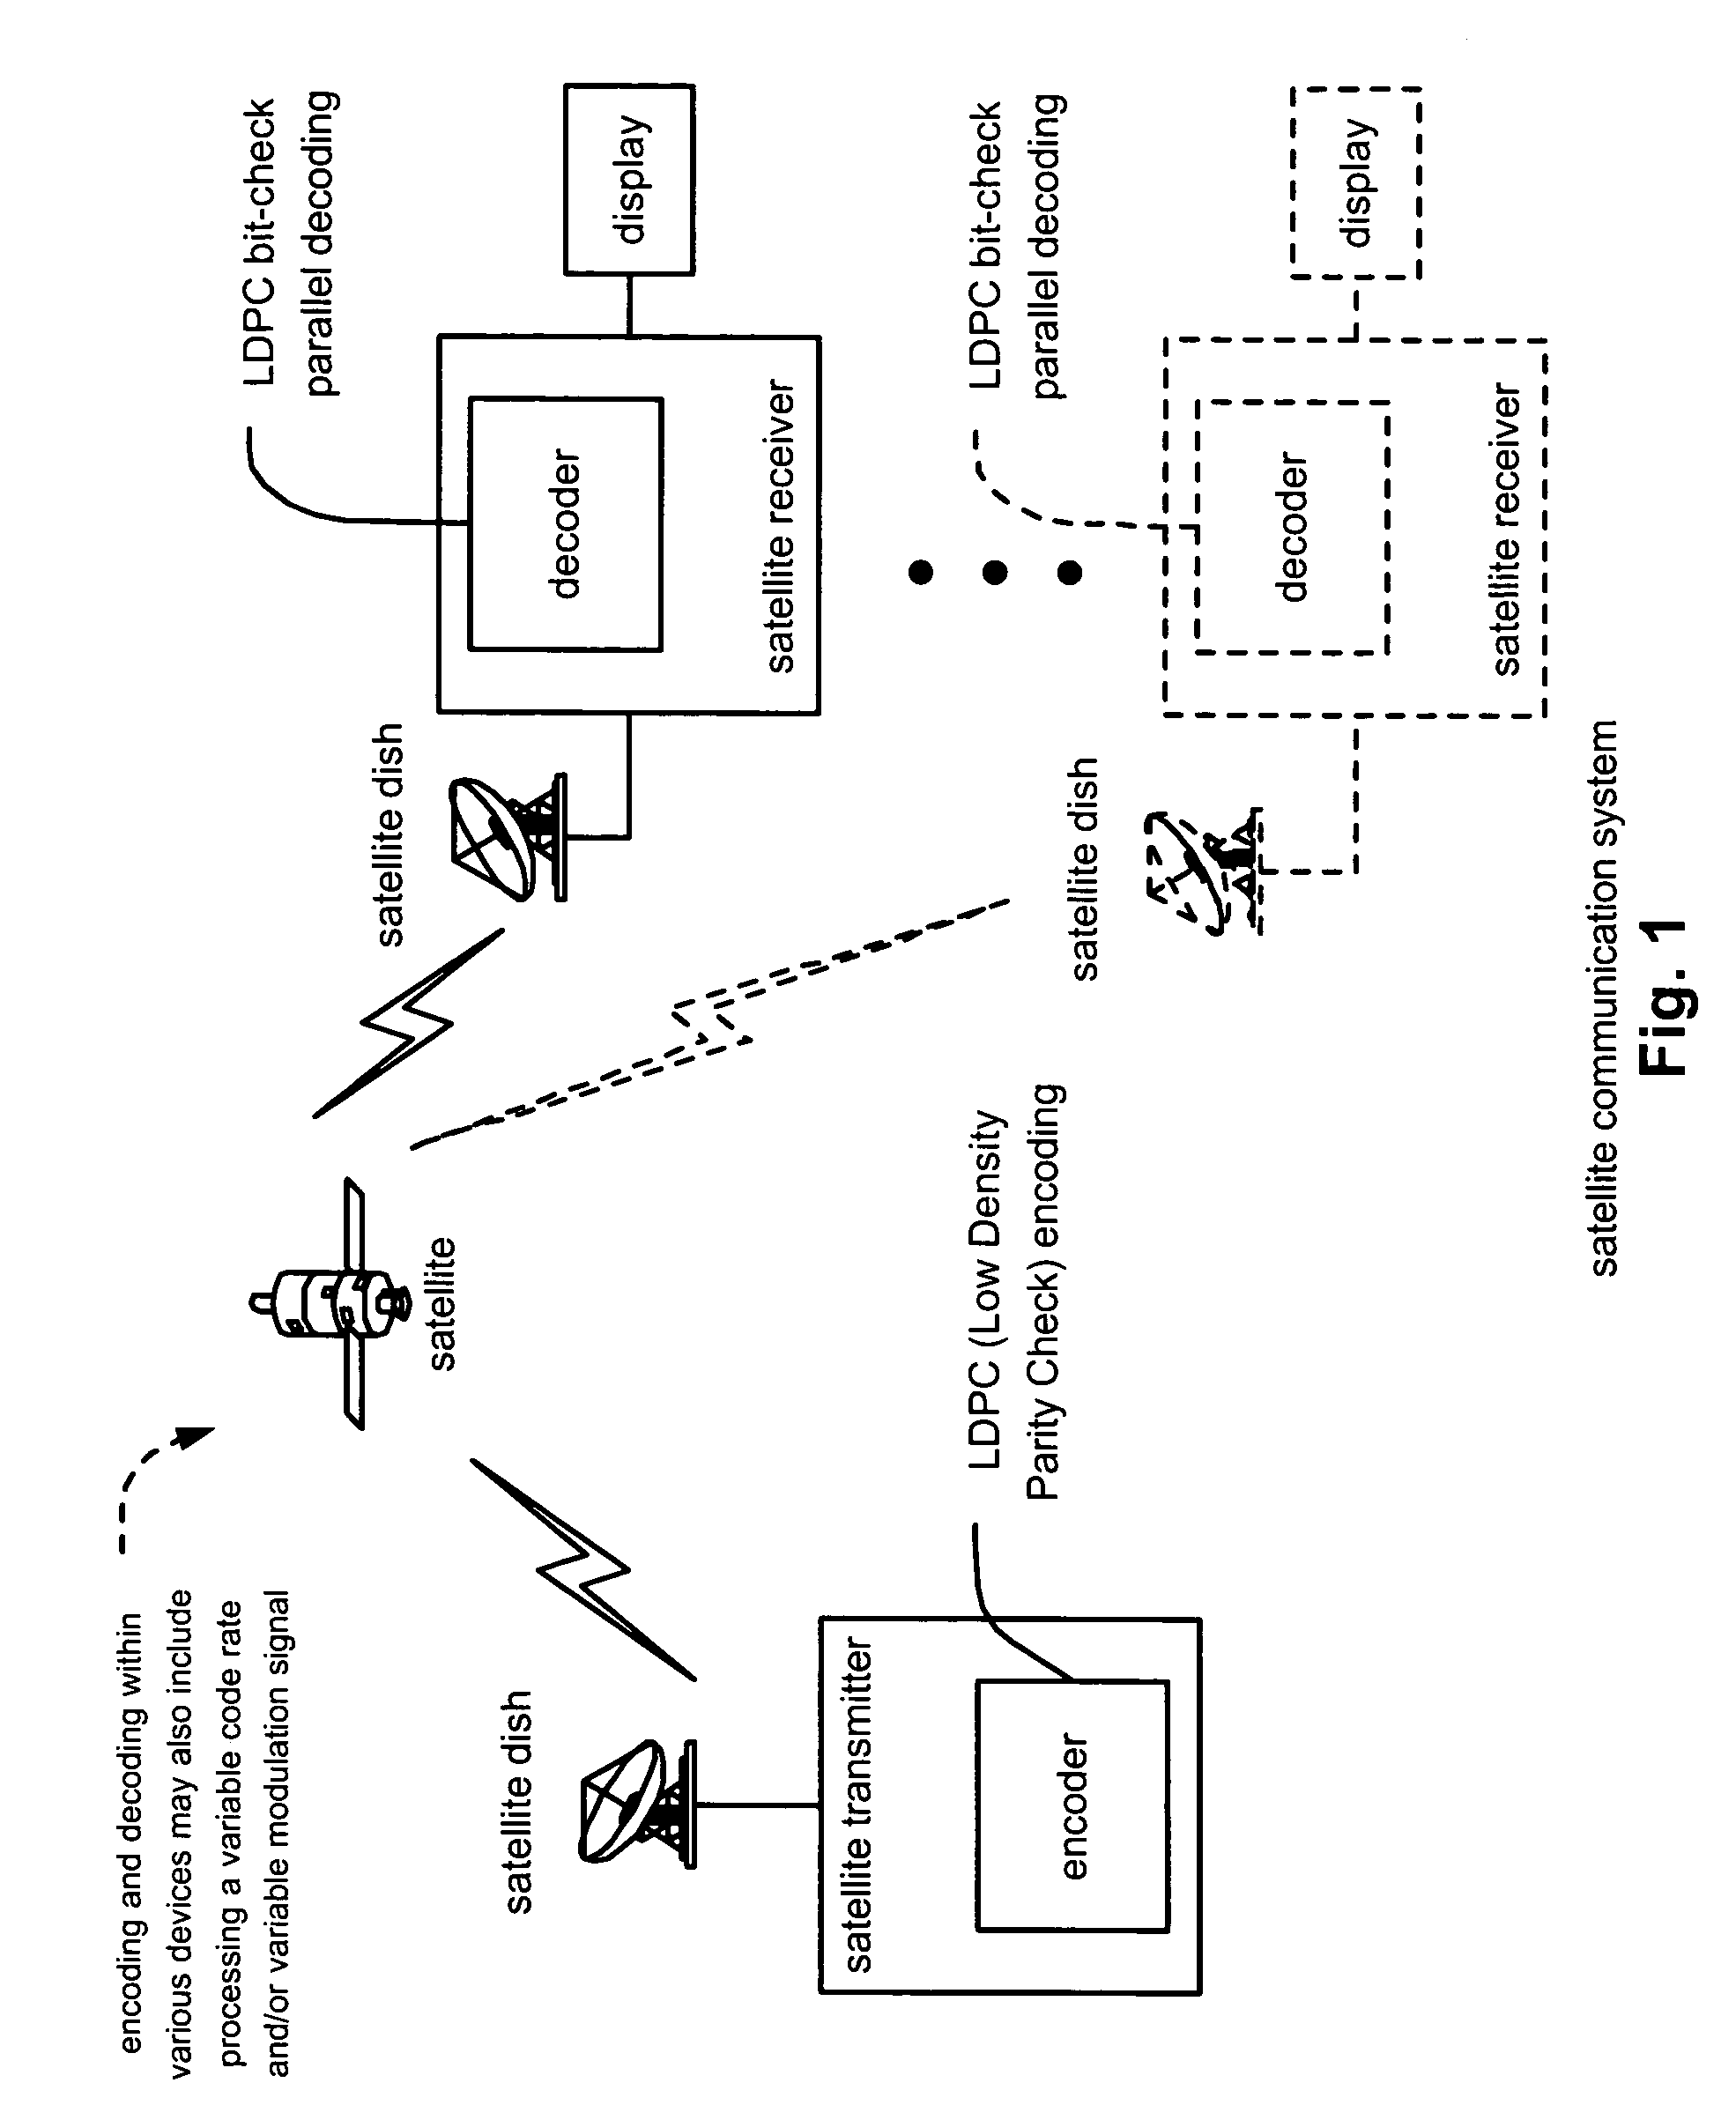 LDPC (Low Density Parity Check) coded signal decoding using parallel and simultaneous bit node and check node processing